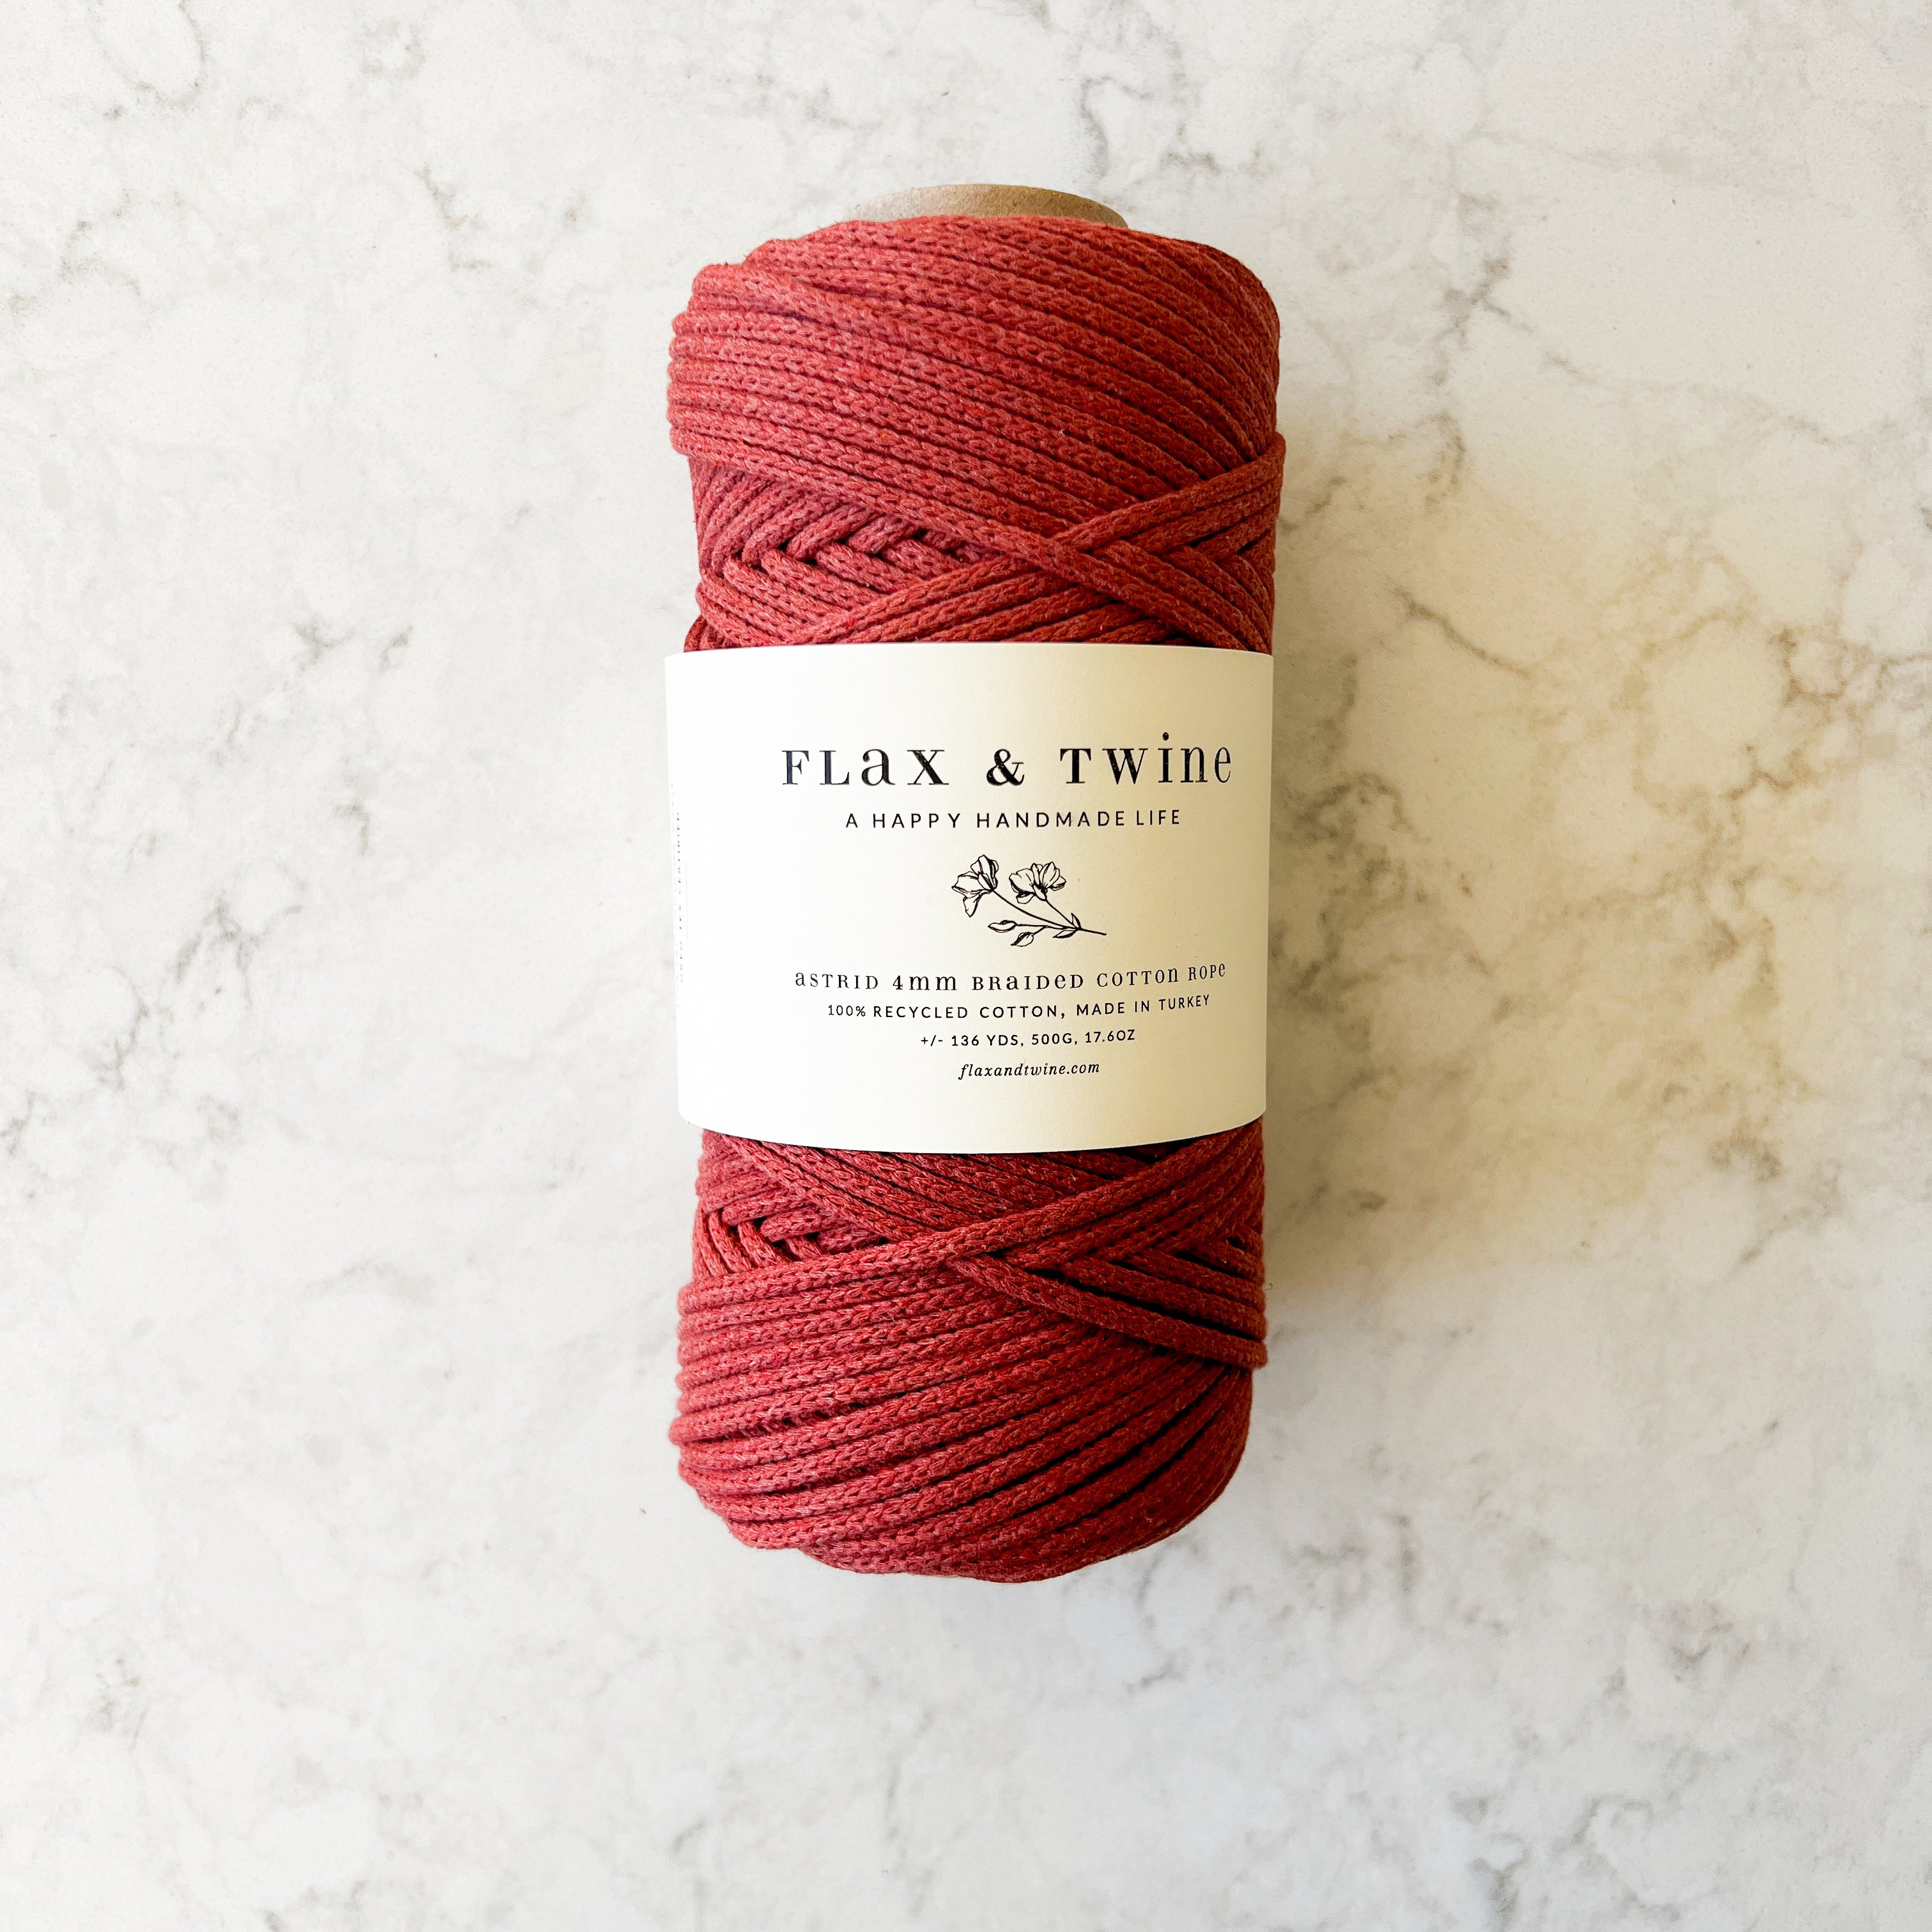 Flax & Twine 4mm Astrid Braided Cotton Rope